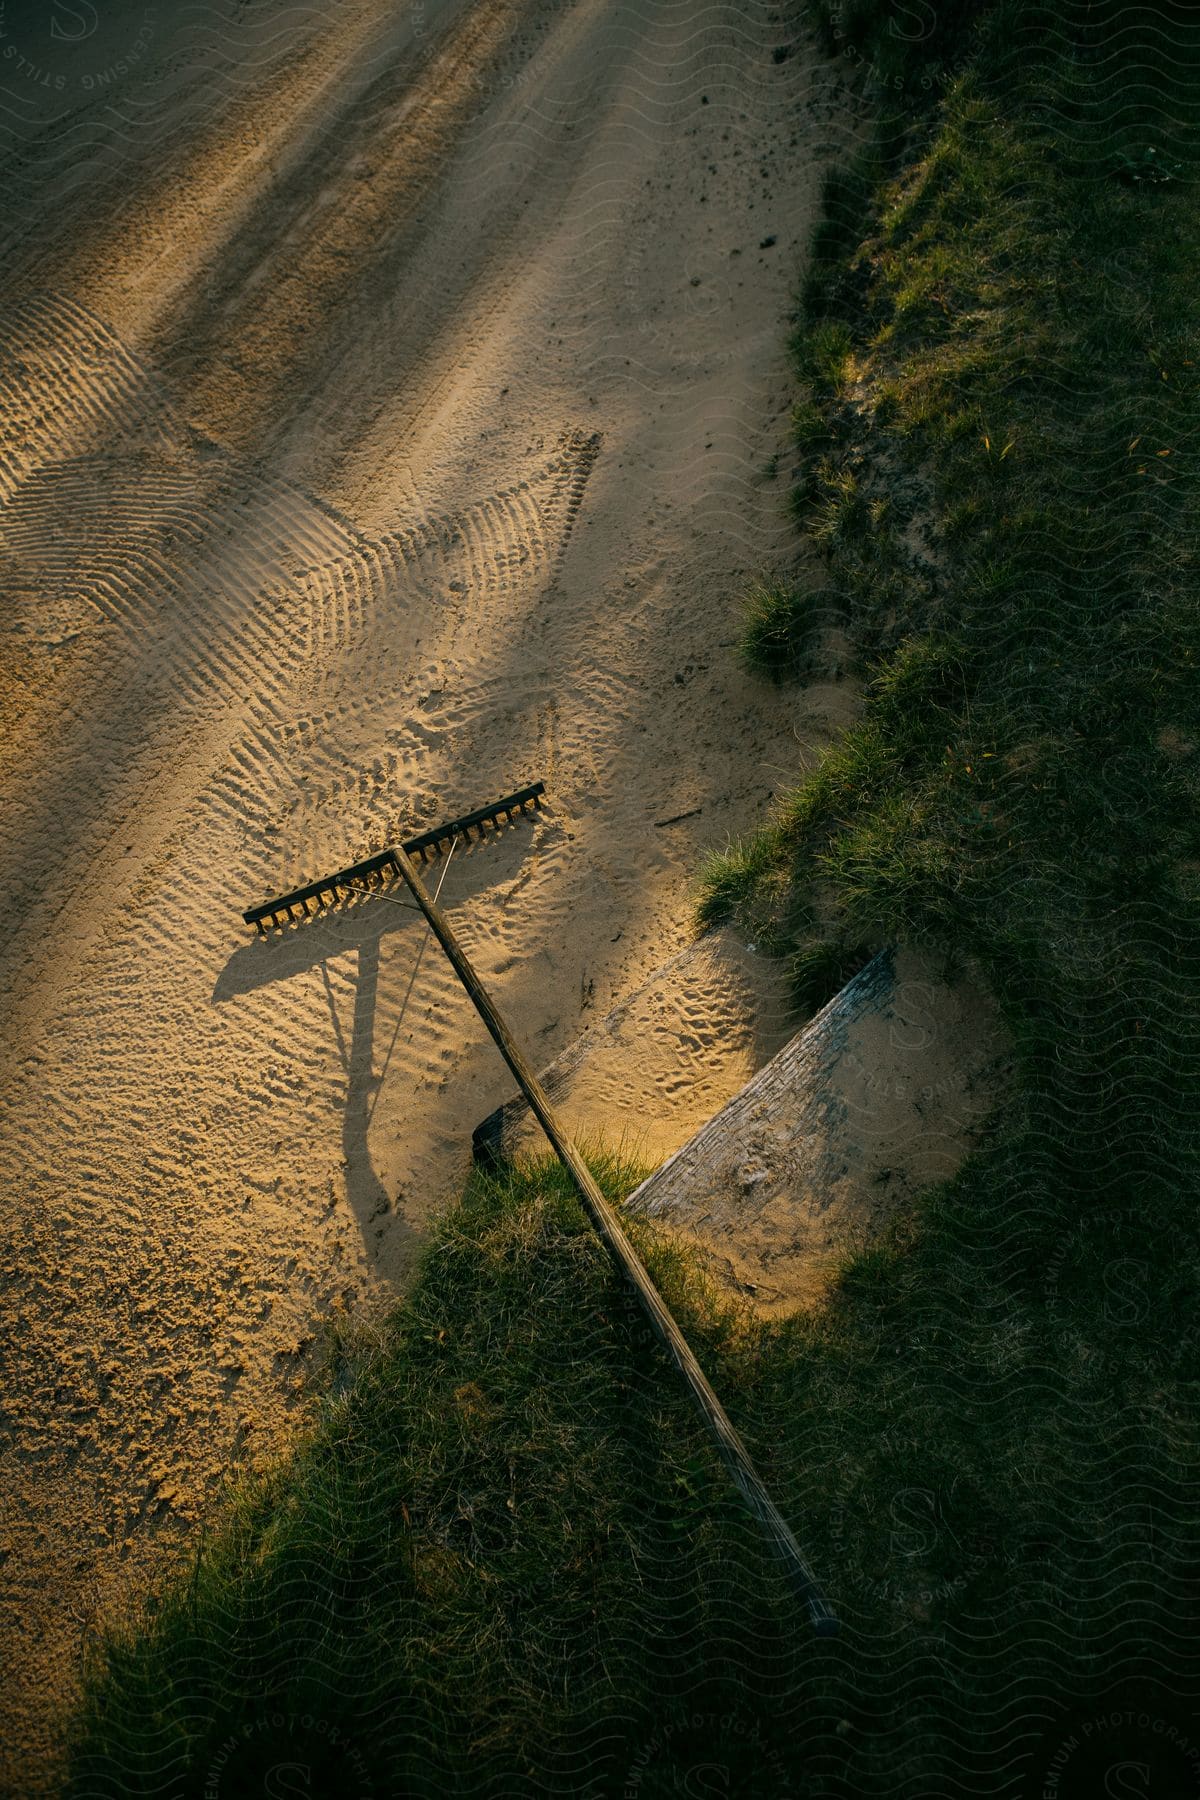 A rake rests over the sand in the ground at morning